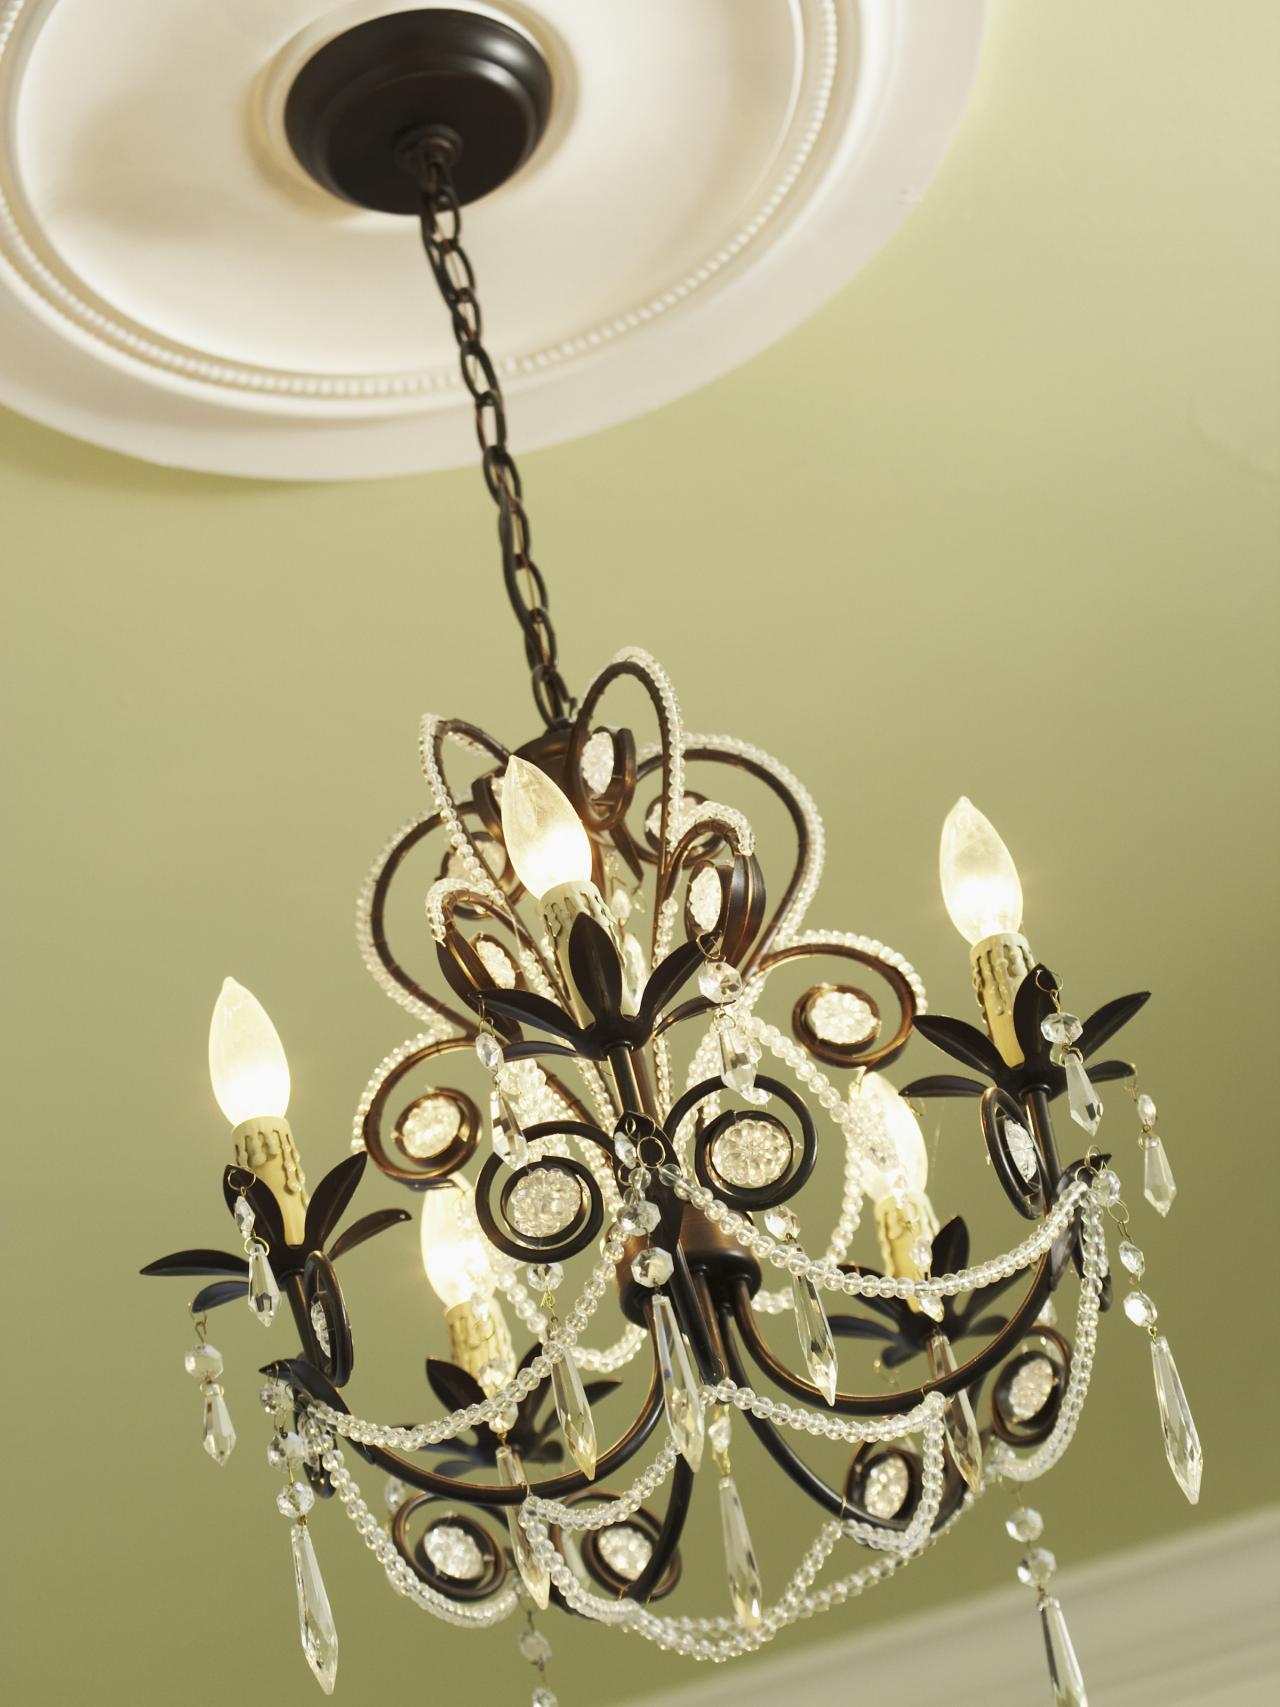 Install A Decorative Ceiling Medallion, How To Install Ceiling Light Medallion